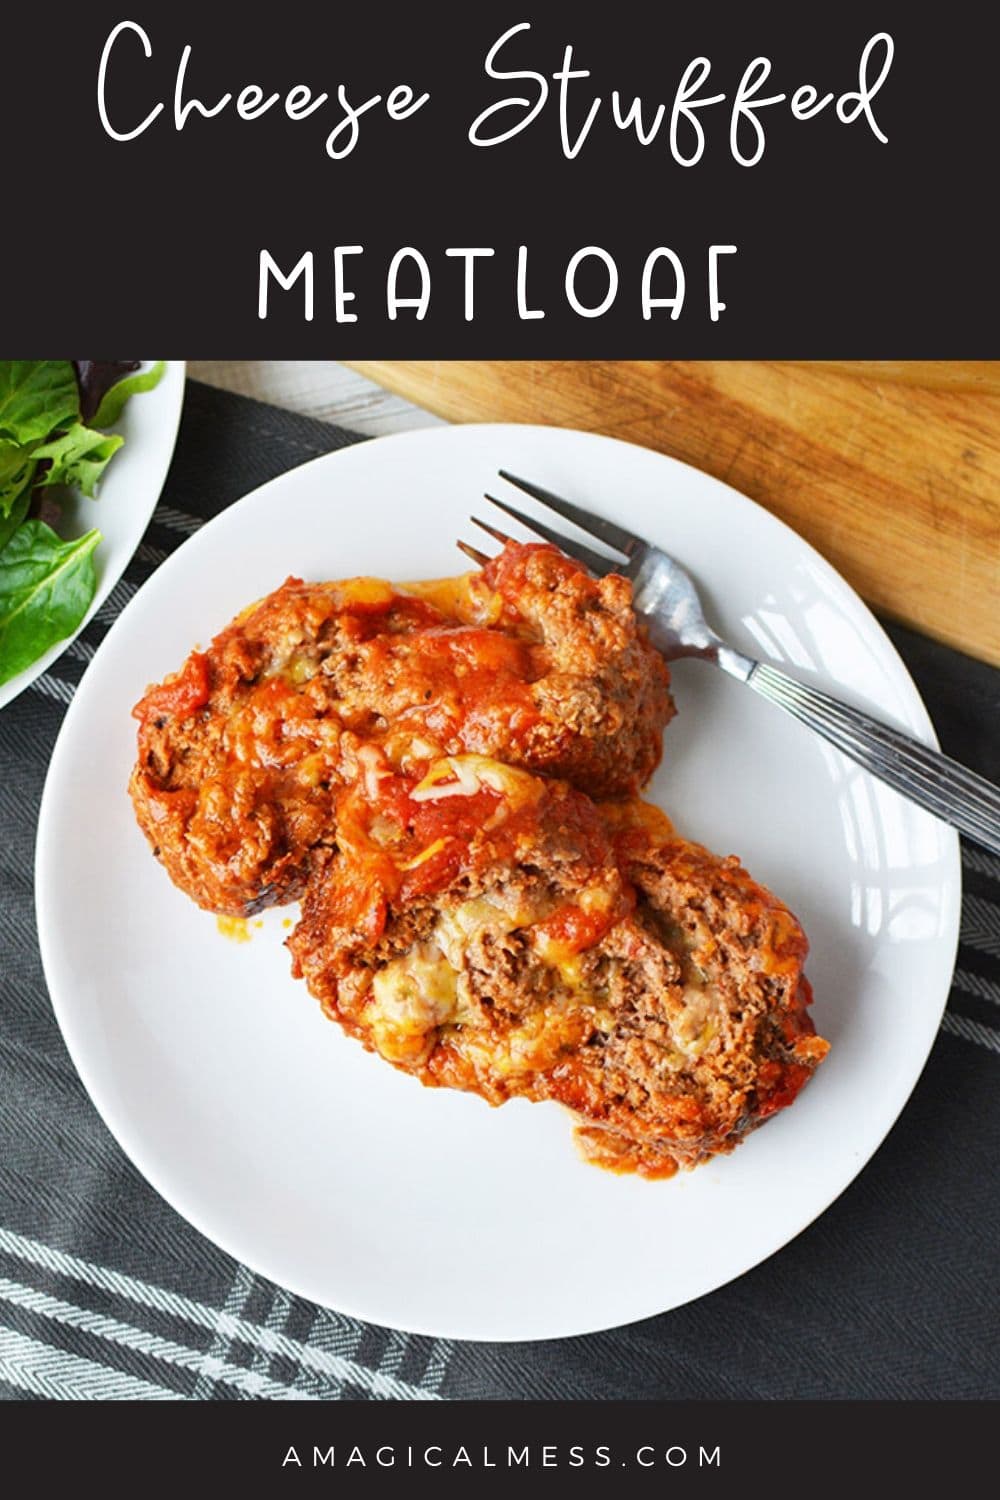 Cheese stuffed meatloaf on a plate